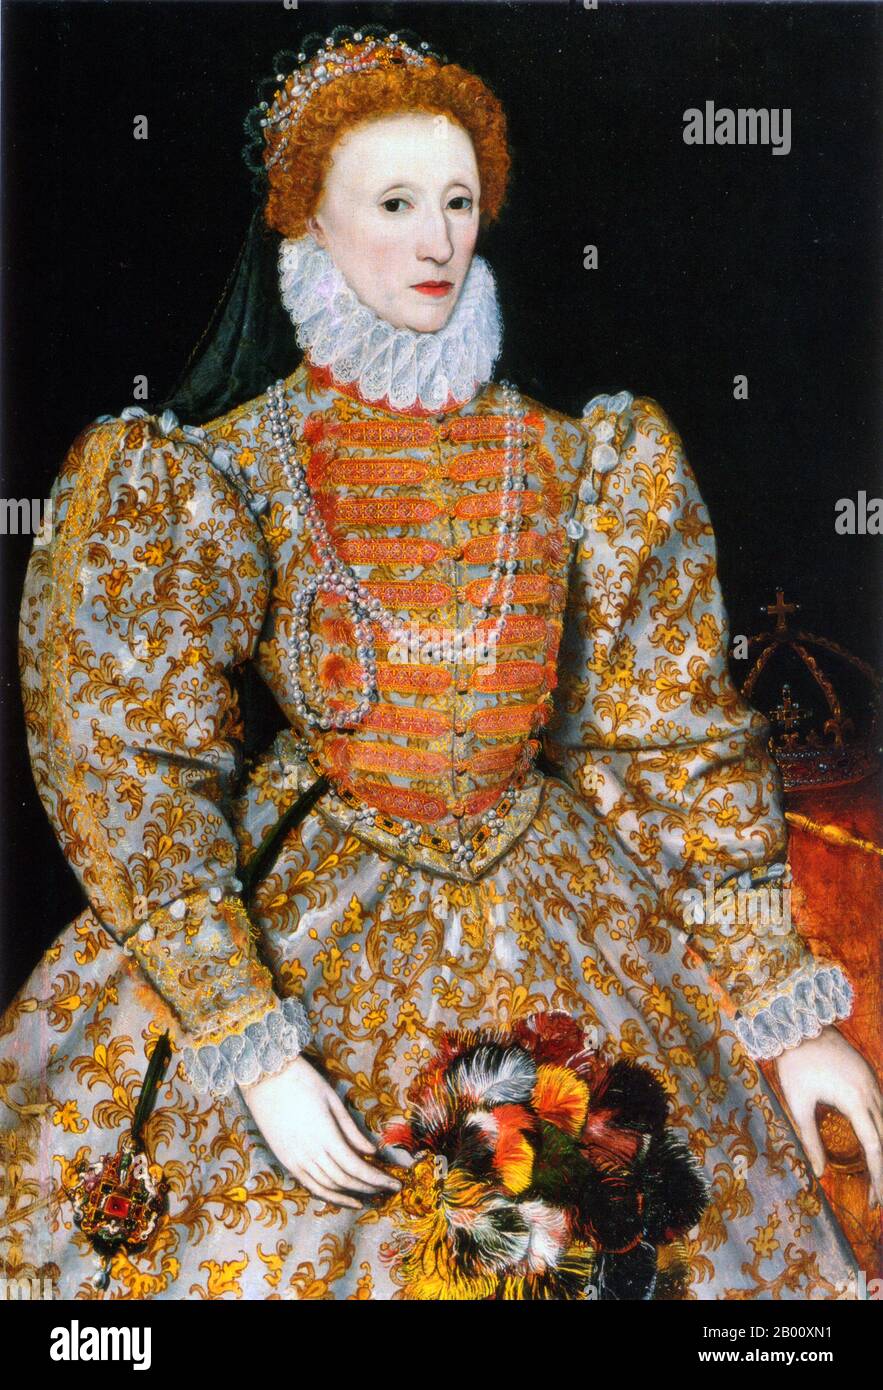 England: 'Queen Elizabeth I'. The 'Darnley Portrait', oil on panel painting by an unidentified artist, c. 1575.  Elizabeth I (7 September 1533 – 24 March 1603) was Queen regnant of England and Queen regnant of Ireland from 17 November 1558 until her death. Sometimes called The Virgin Queen, Gloriana, or Good Queen Bess, Elizabeth was the fifth and last monarch of the Tudor dynasty. Elizabeth I's foreign policy with regard to Asia, Africa and Latin America demonstrated a new understanding of the role of England as a maritime, Protestant power in an increasingly global economy. Stock Photo